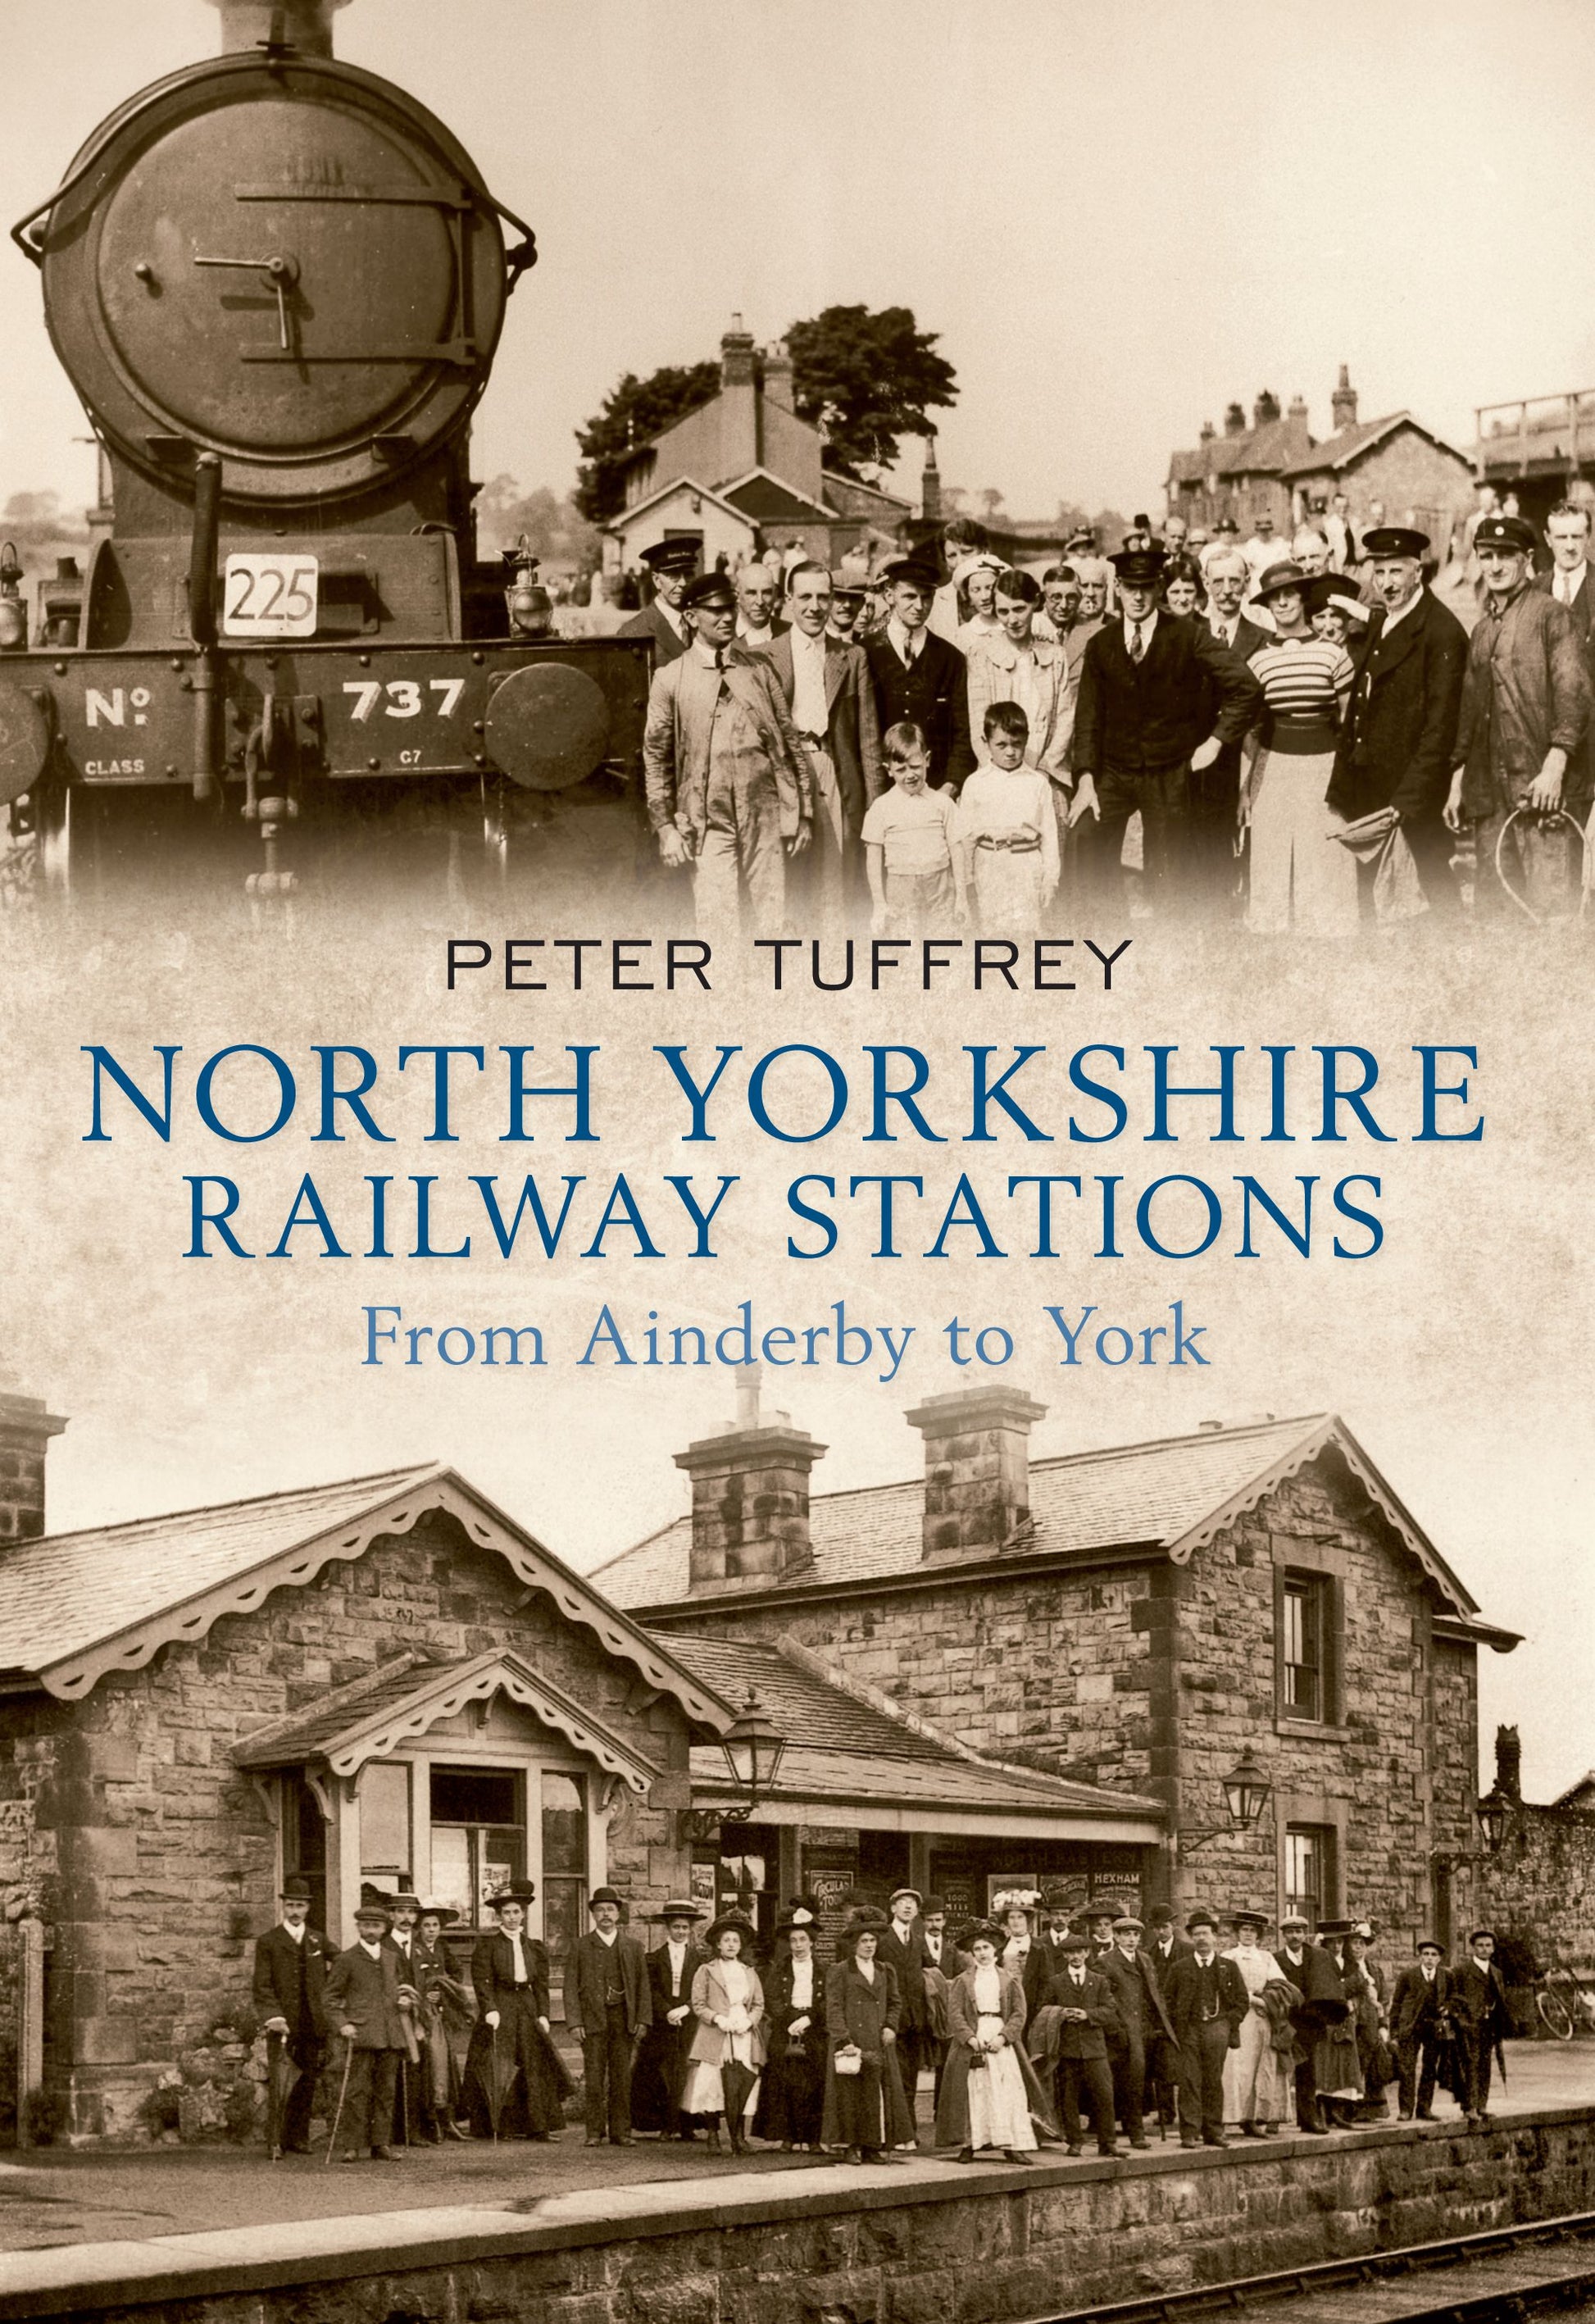 North Yorkshire Railway Stations from Ainderby to York - Peter Tuffrey - Chester Model Centre